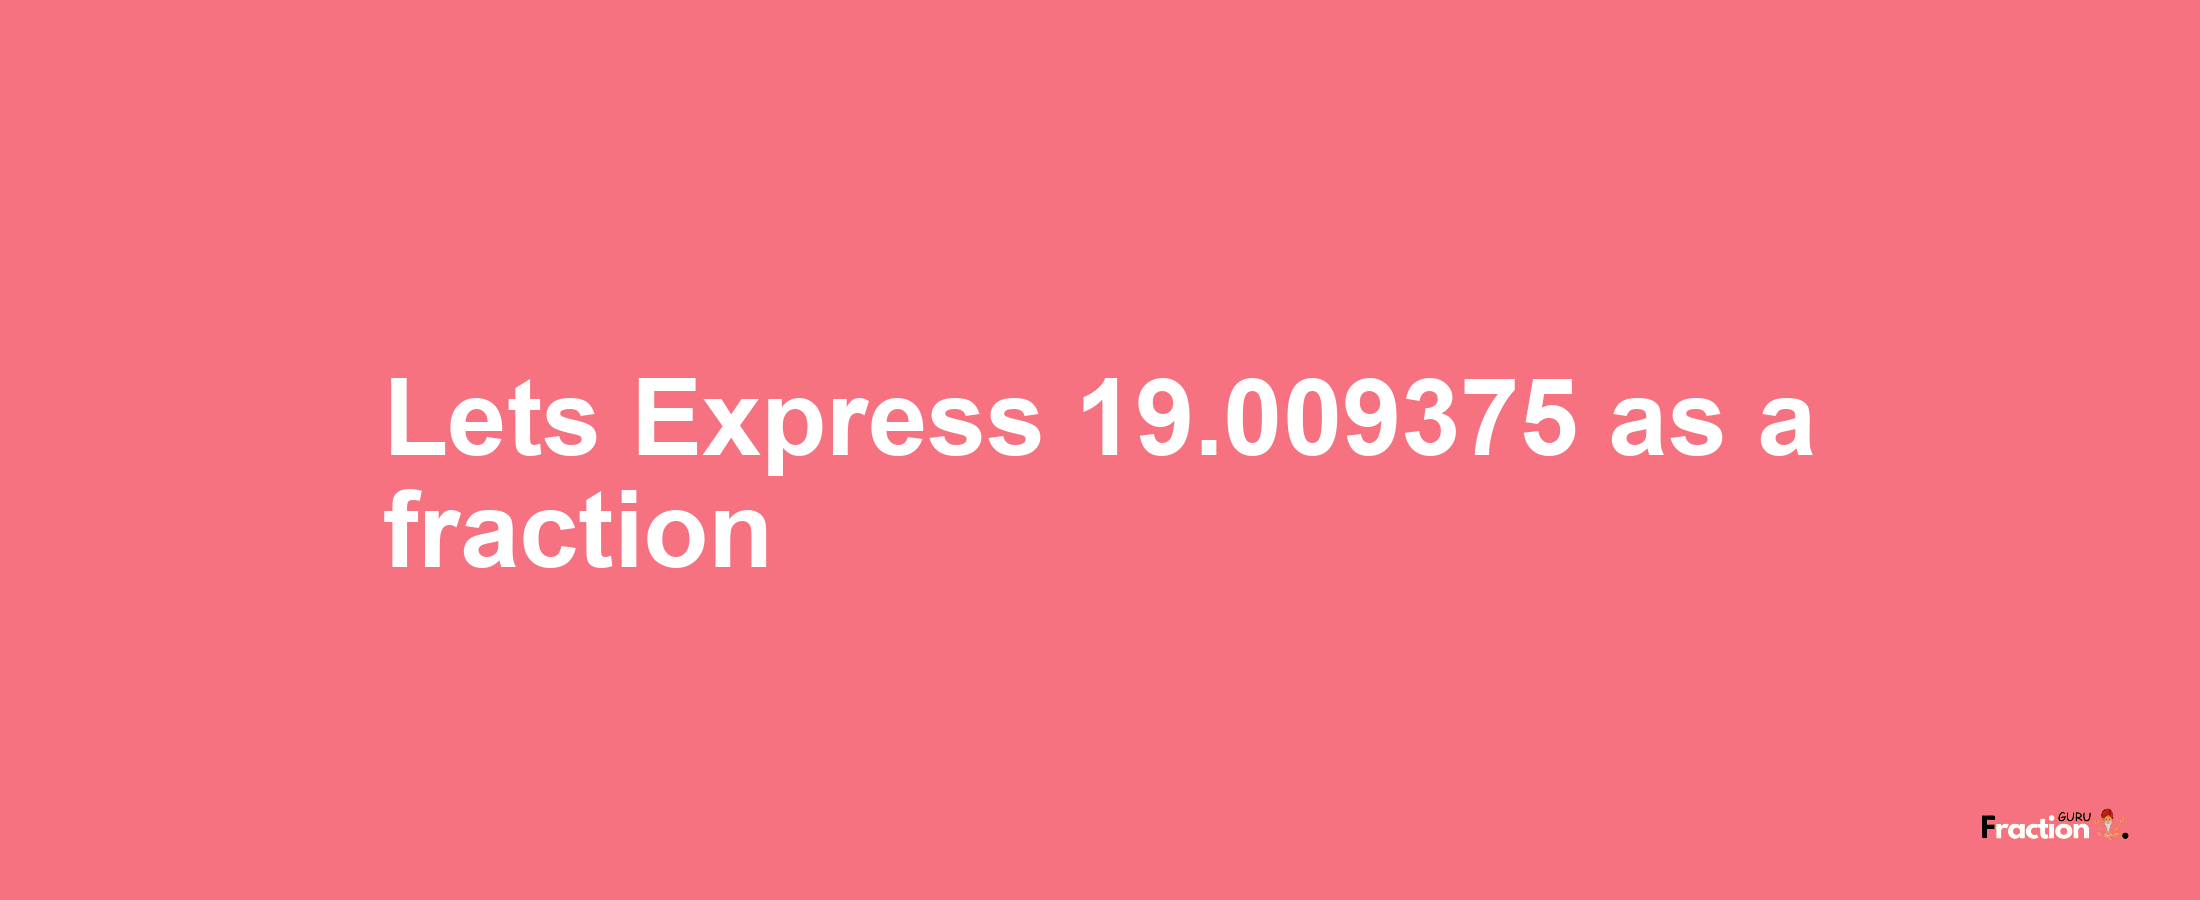 Lets Express 19.009375 as afraction